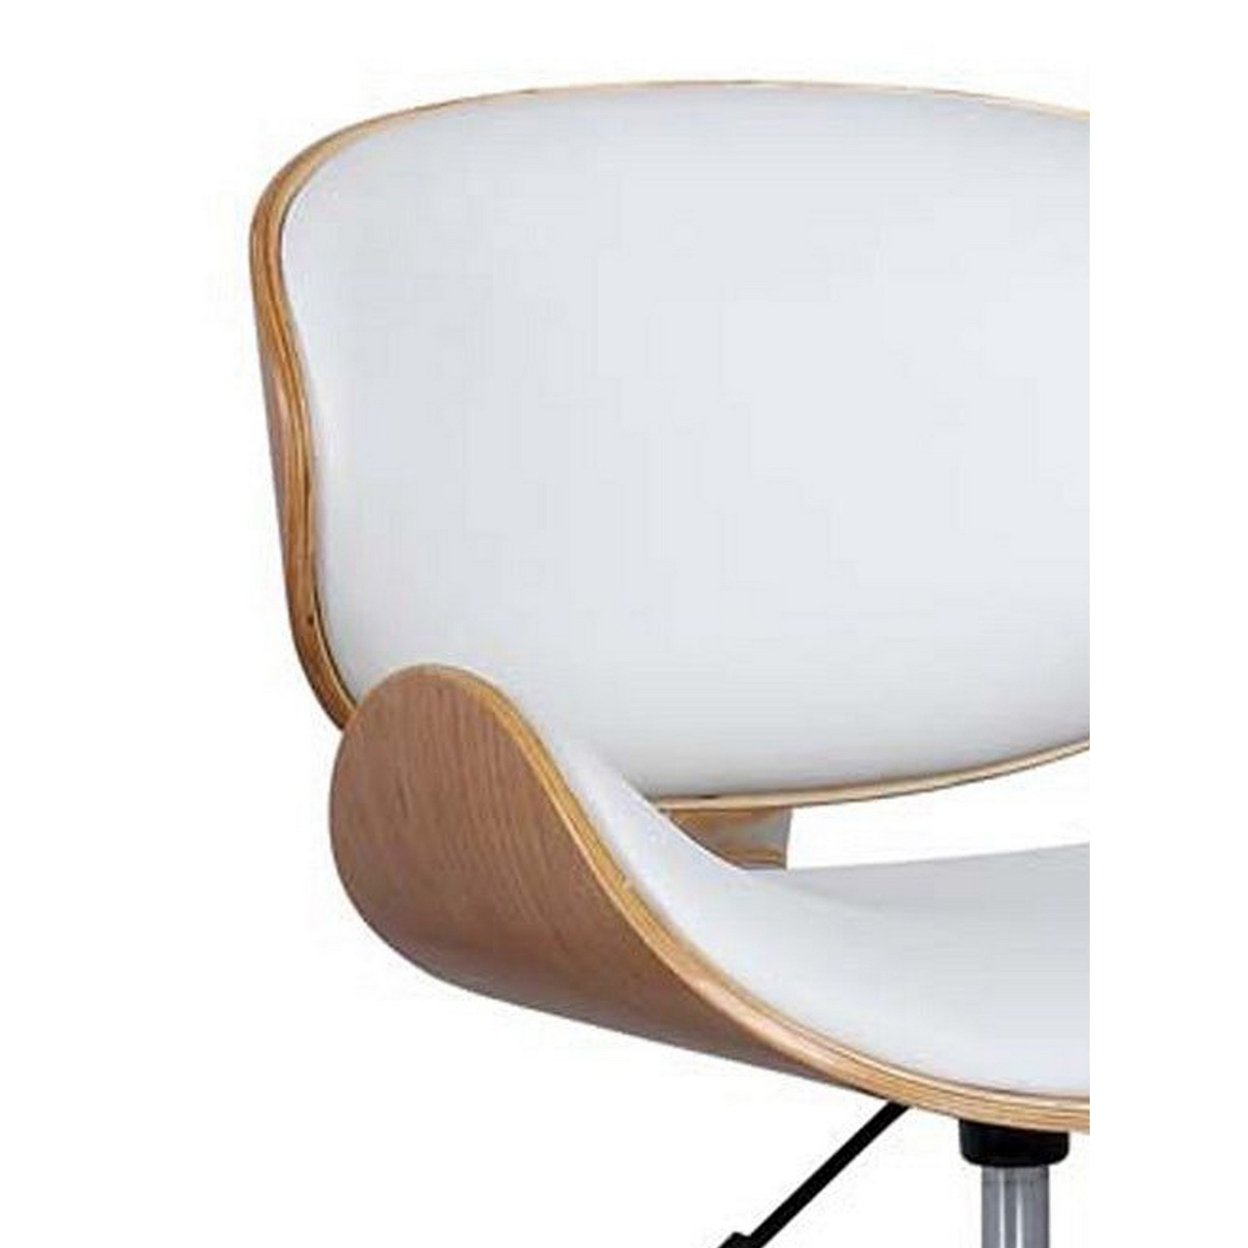 23 Inch Swivel Office Chair, Curved Wood Seat And Back, White Faux Leather - Saltoro Sherpi